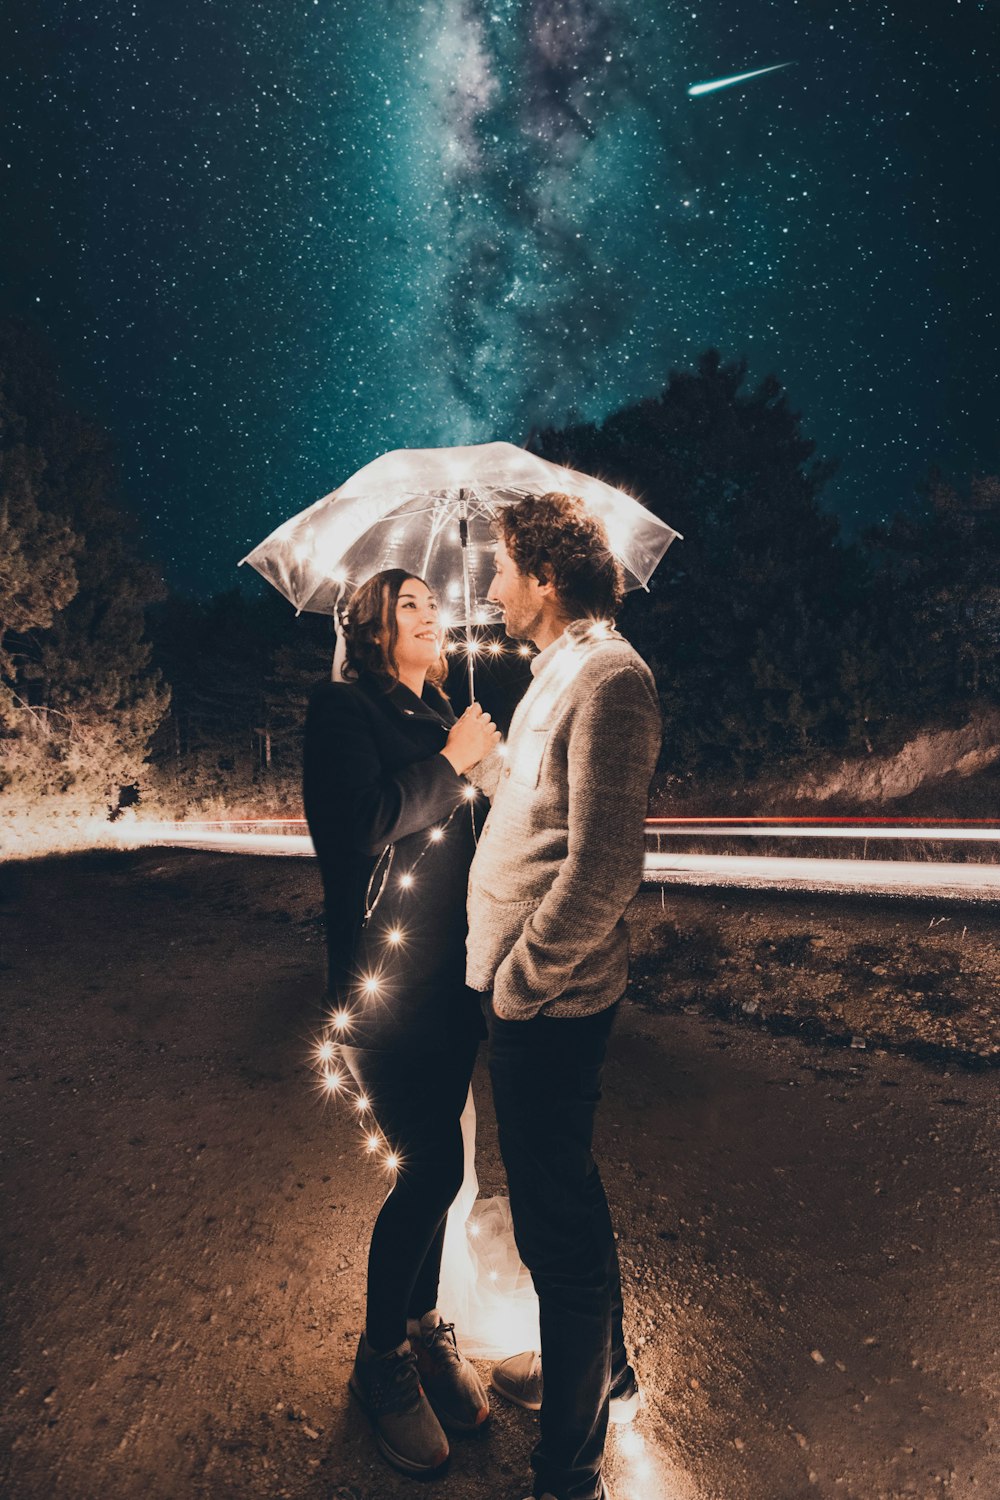 couple under clear umbrella with string lights during night